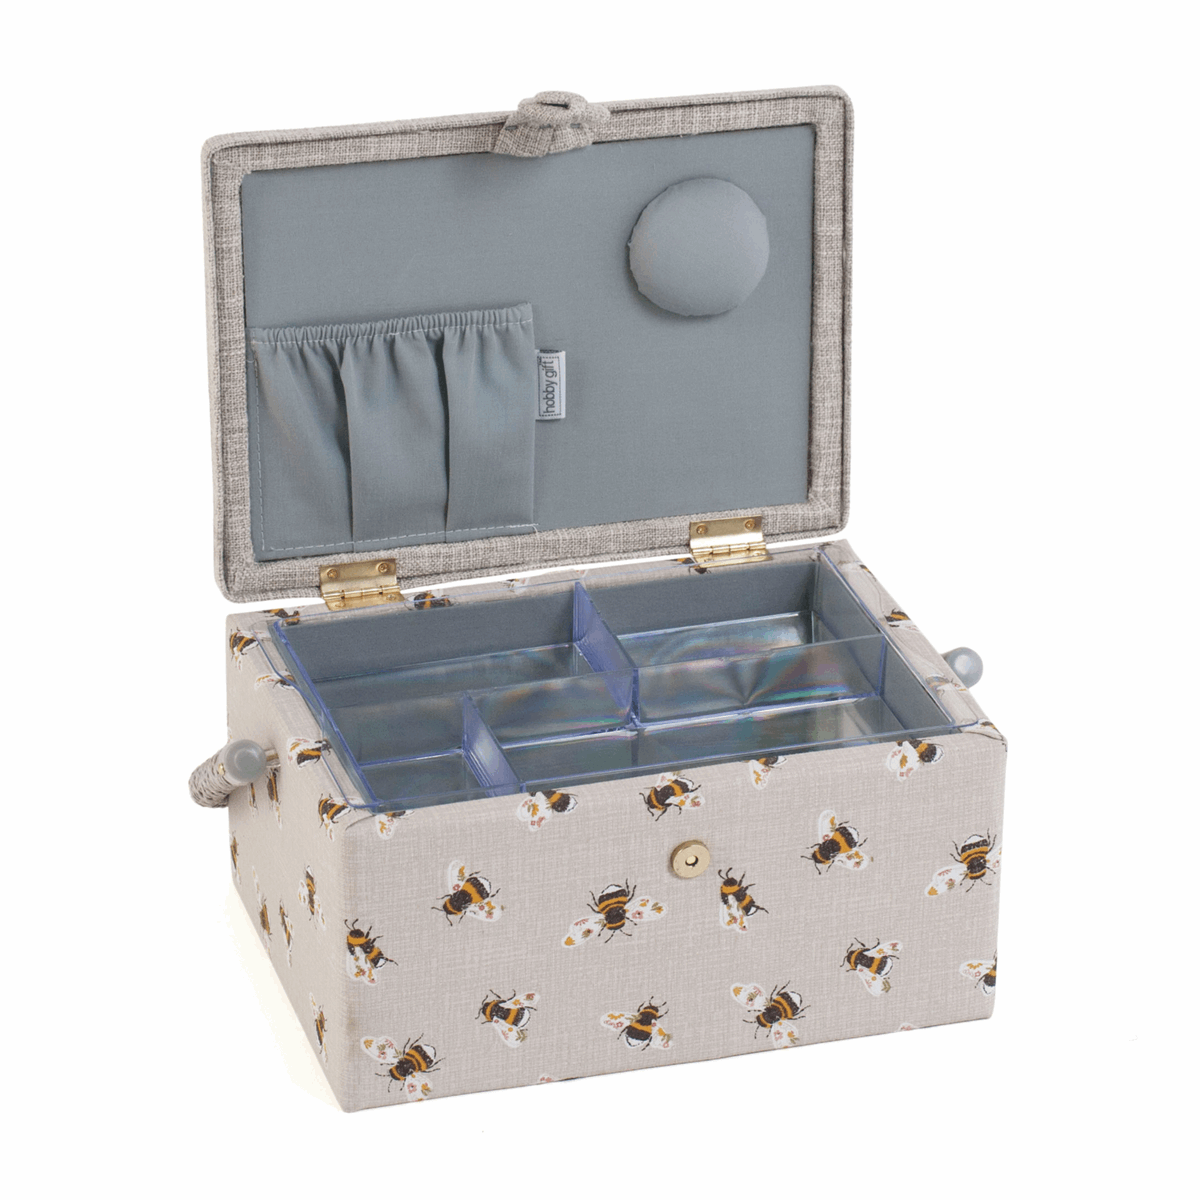 Bee Happy Sewing Box with Embroidered Lid - Medium